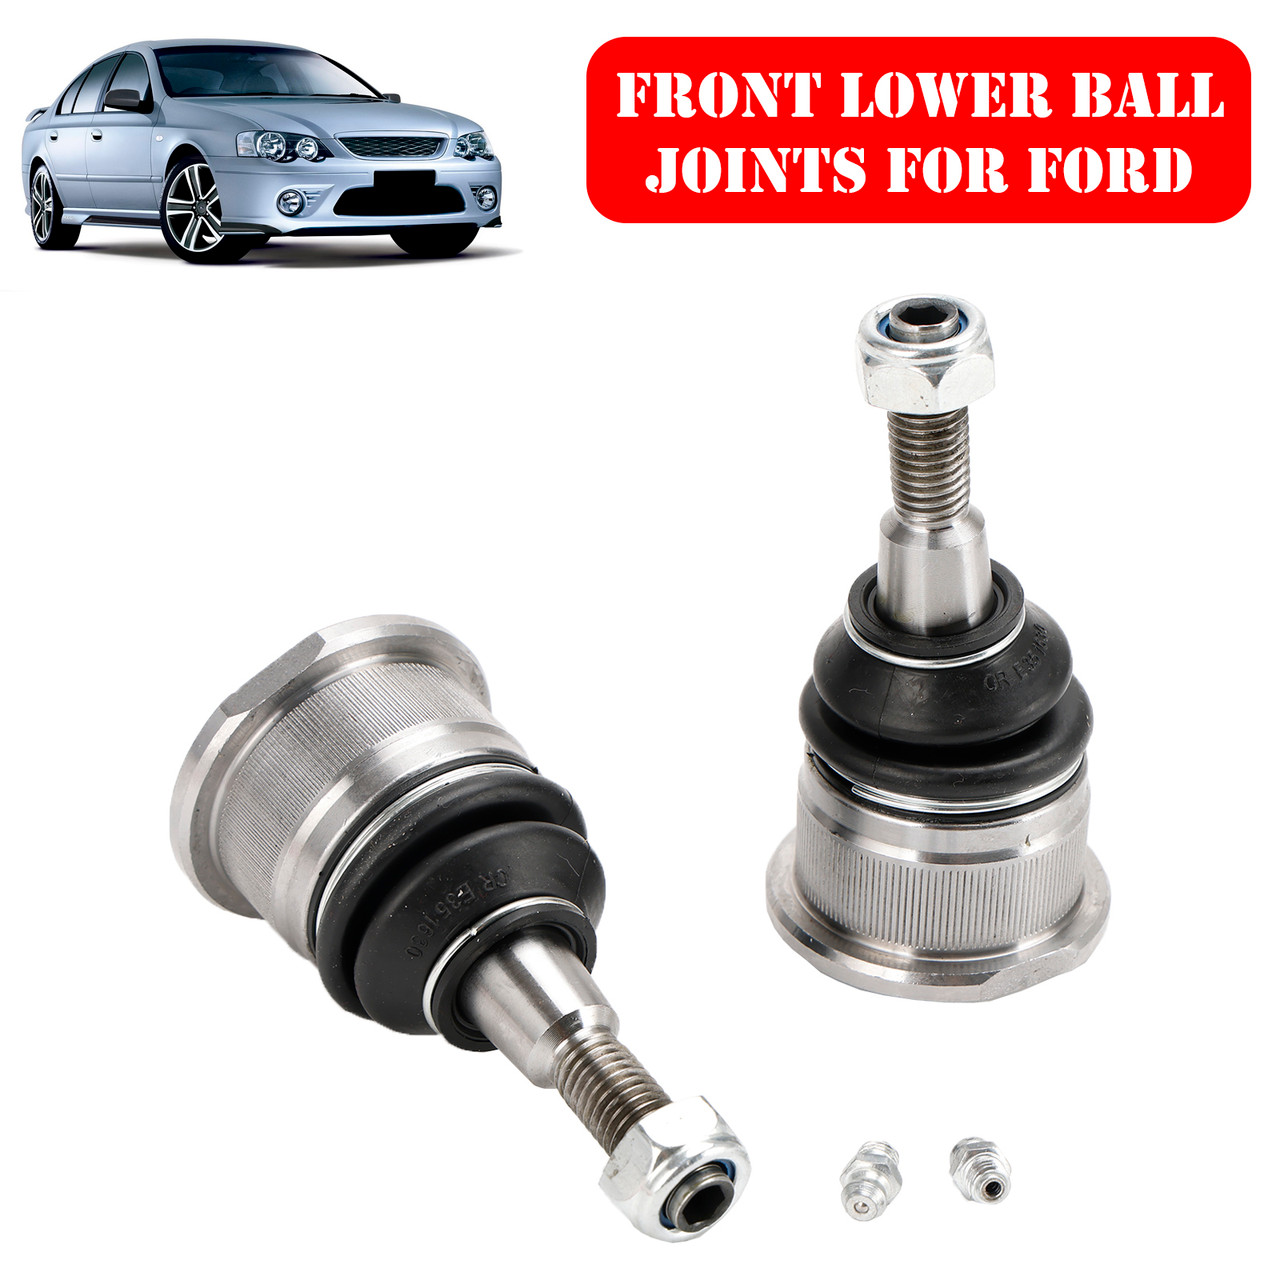 BA3395A 2002-2005 Ford Falcon BA 2005-2011 Ford Falcon BF 1998-2002 Falcon AU1 6CYL 4.0L & V8 5.4L Pair Front Lower Ball Joints